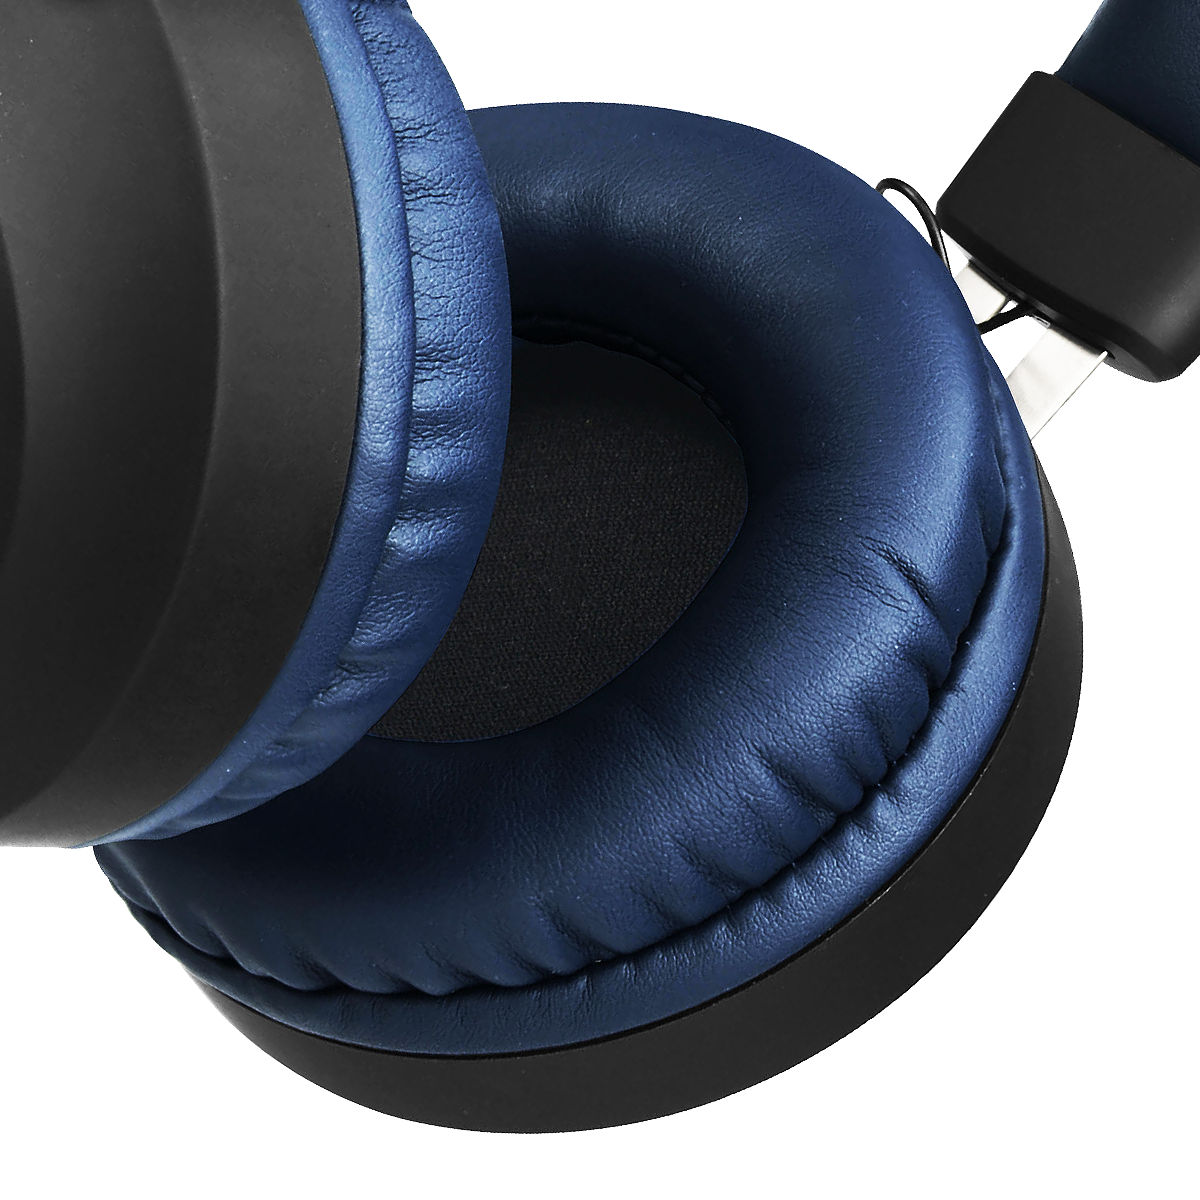 B-YOND HEADSET<BR>PERFECT FOR GAMING